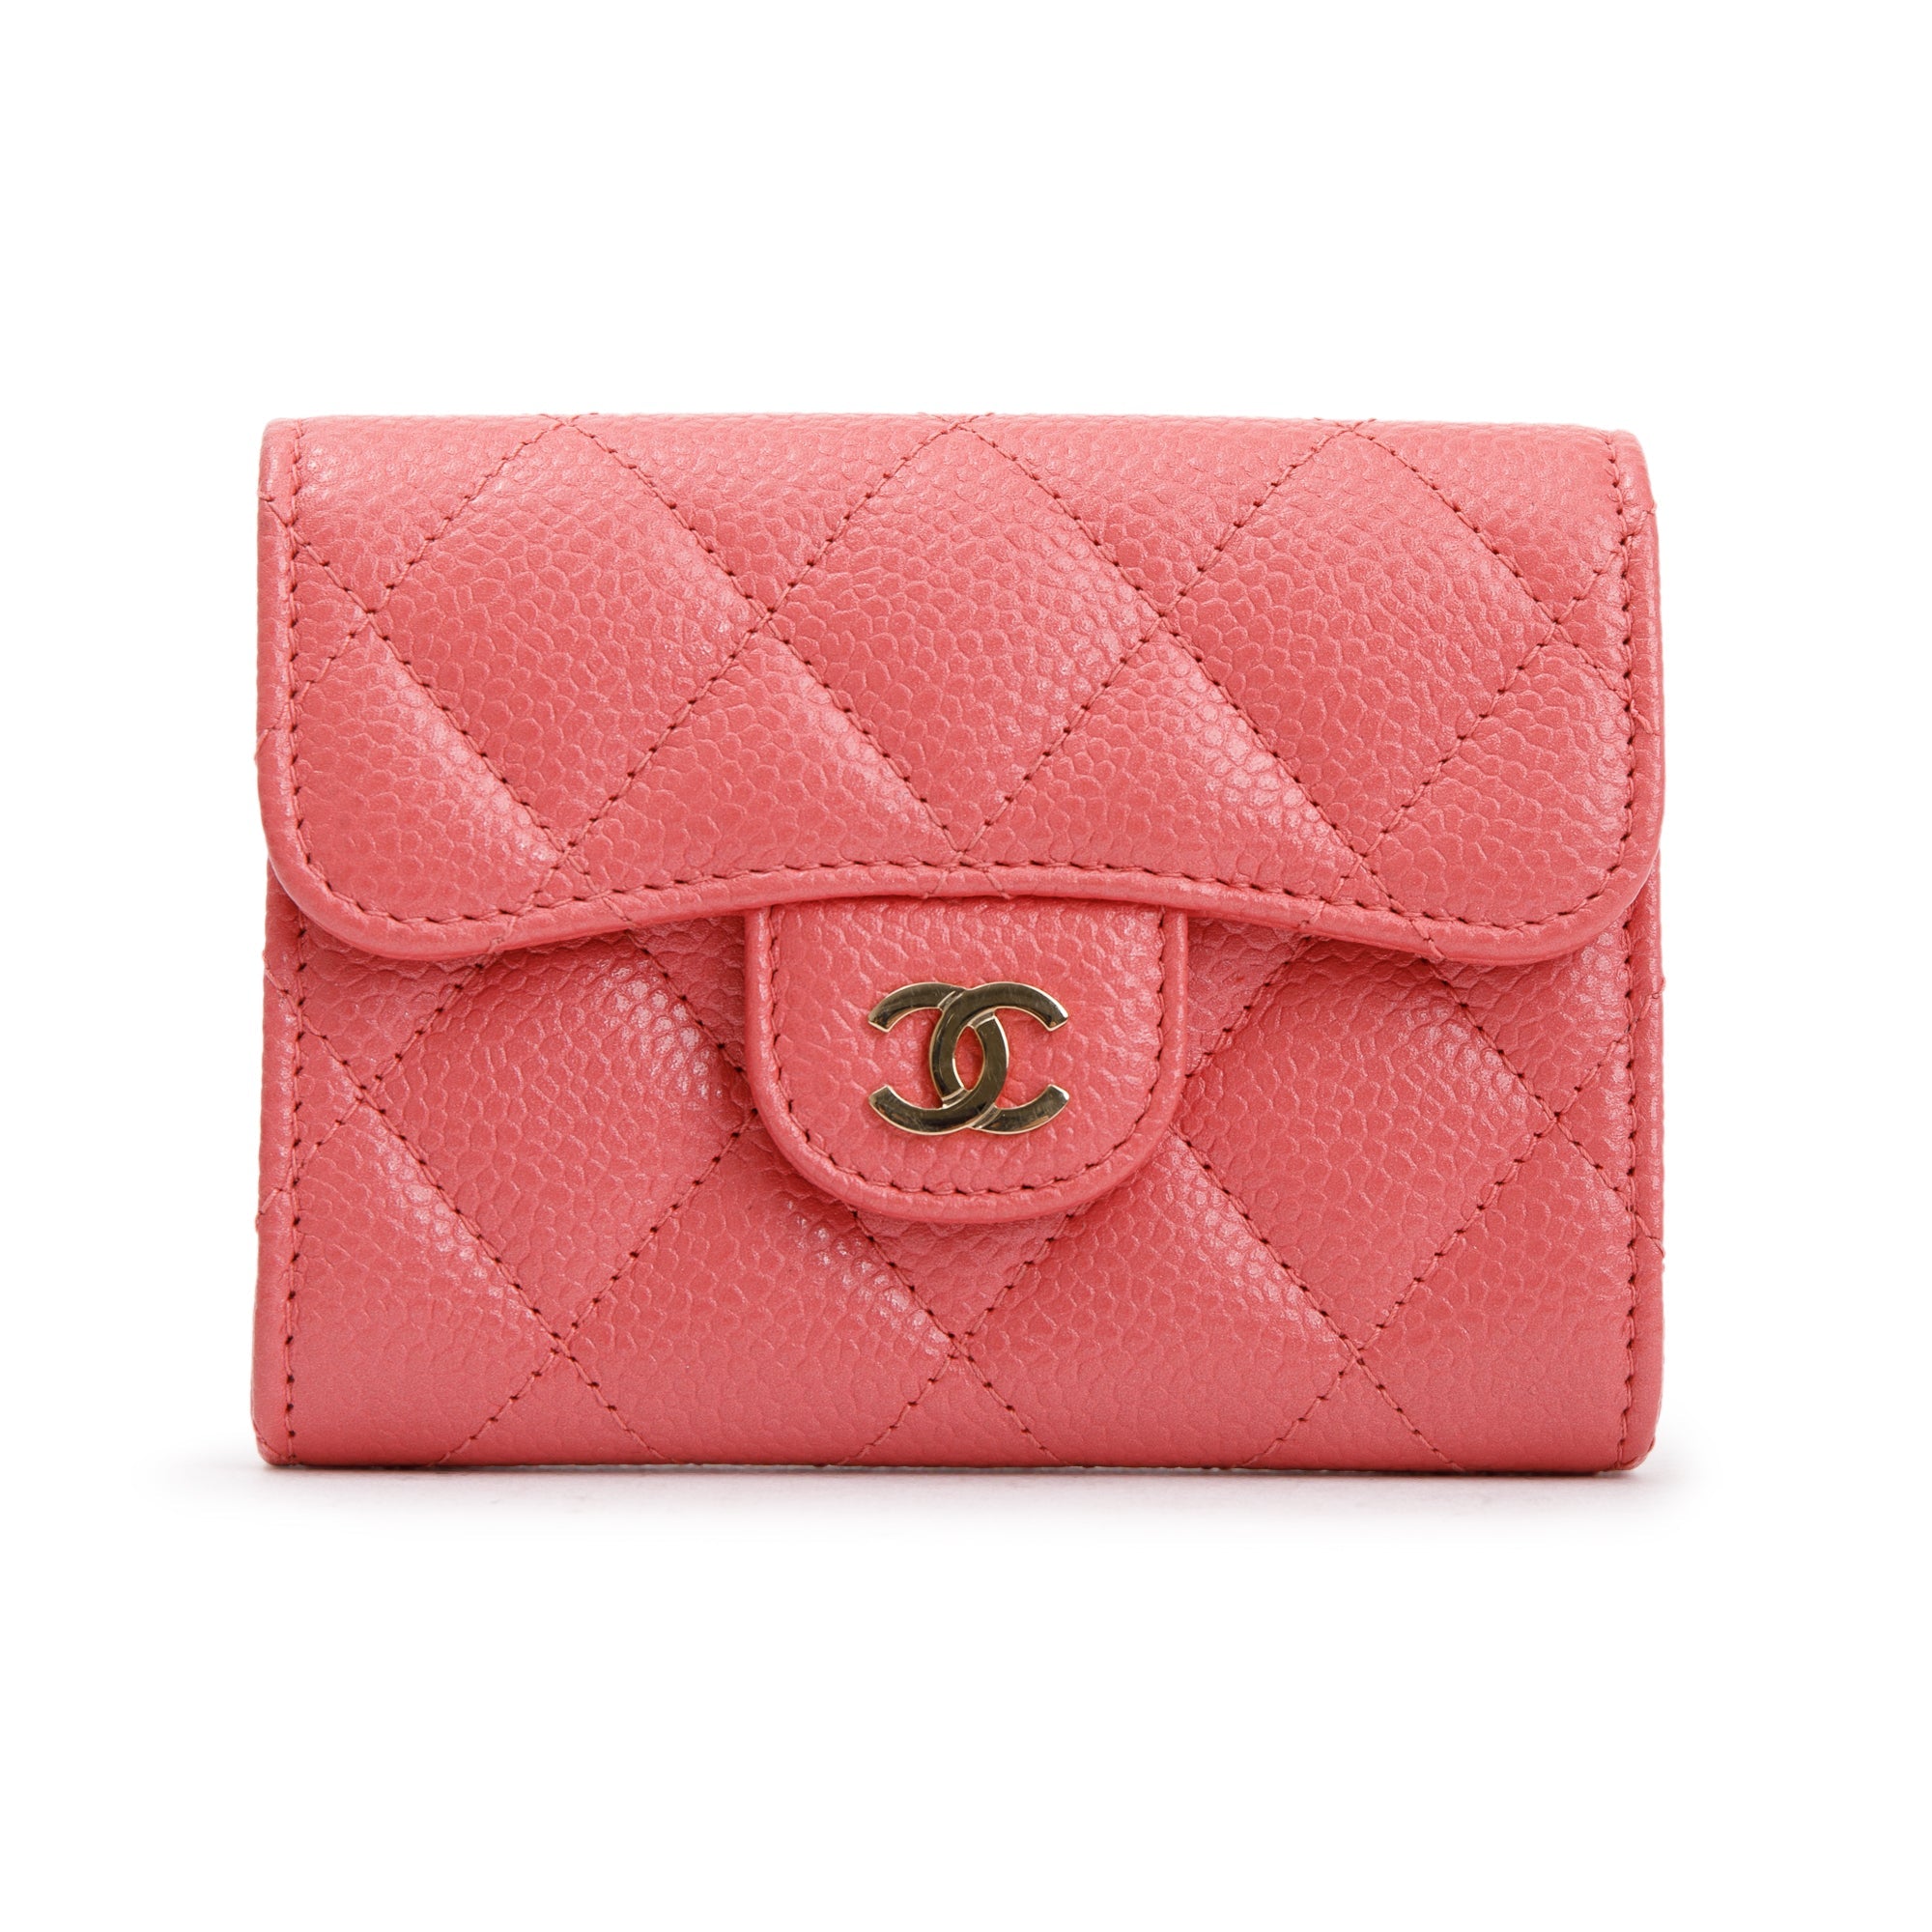 Chanel Pink Caviar Quilted Leather Flap Card Holder w/ Box & Authenticity  Card